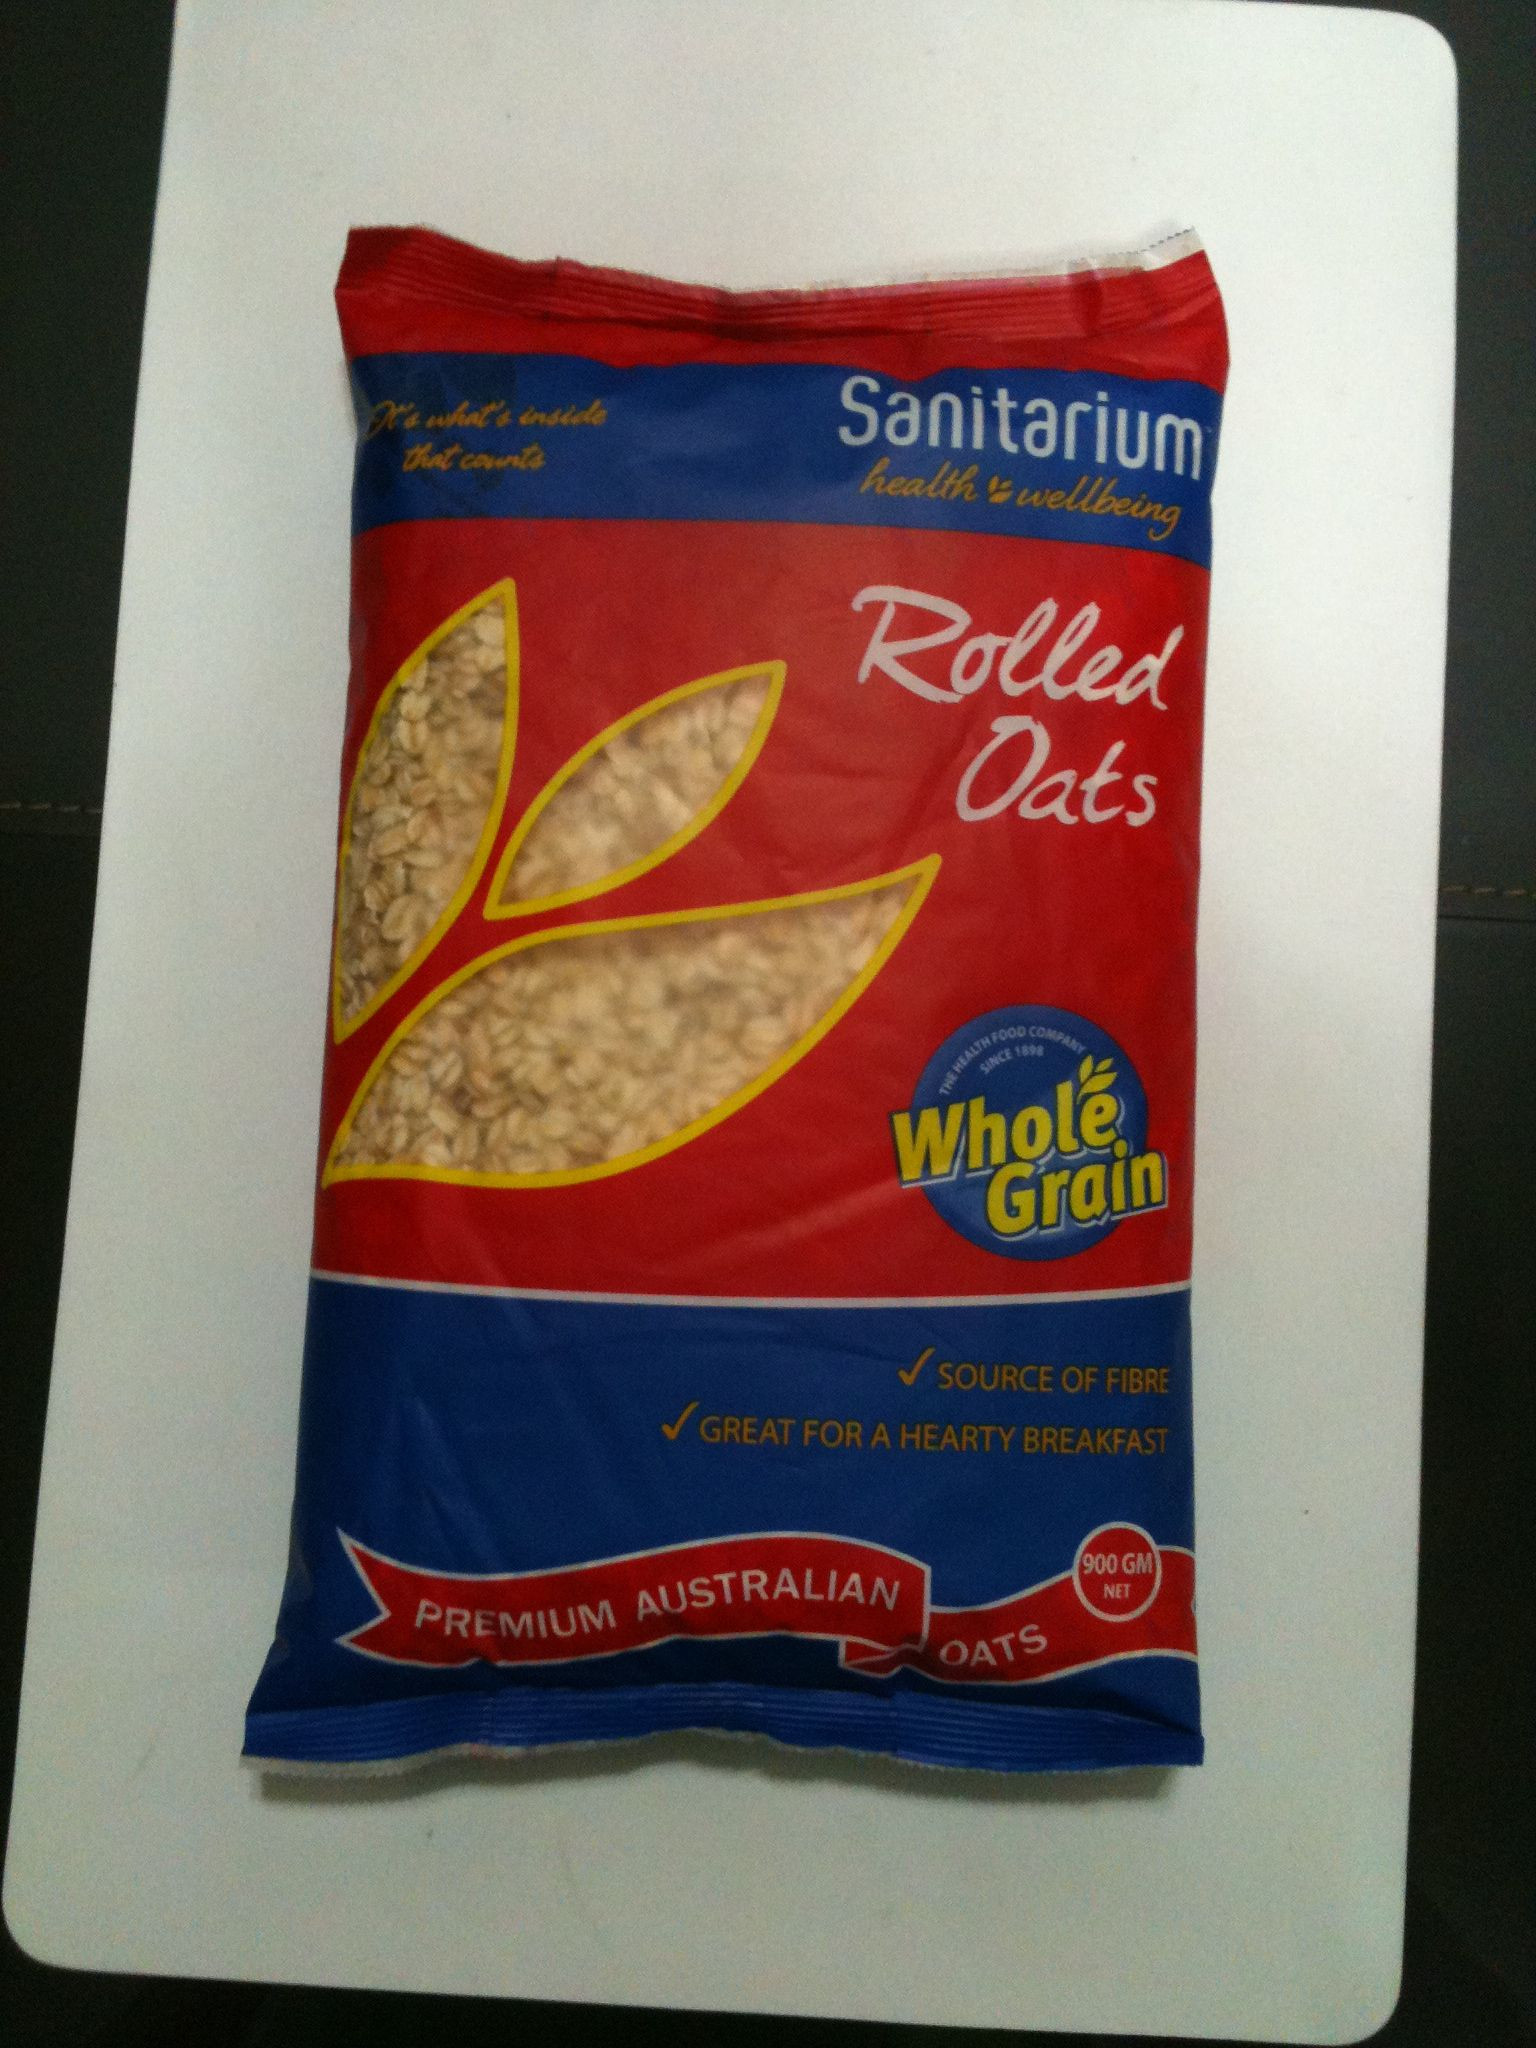 Fiber In Rolled Oats
 Sanitarium whole grain rolled oats RM9 for 900gm